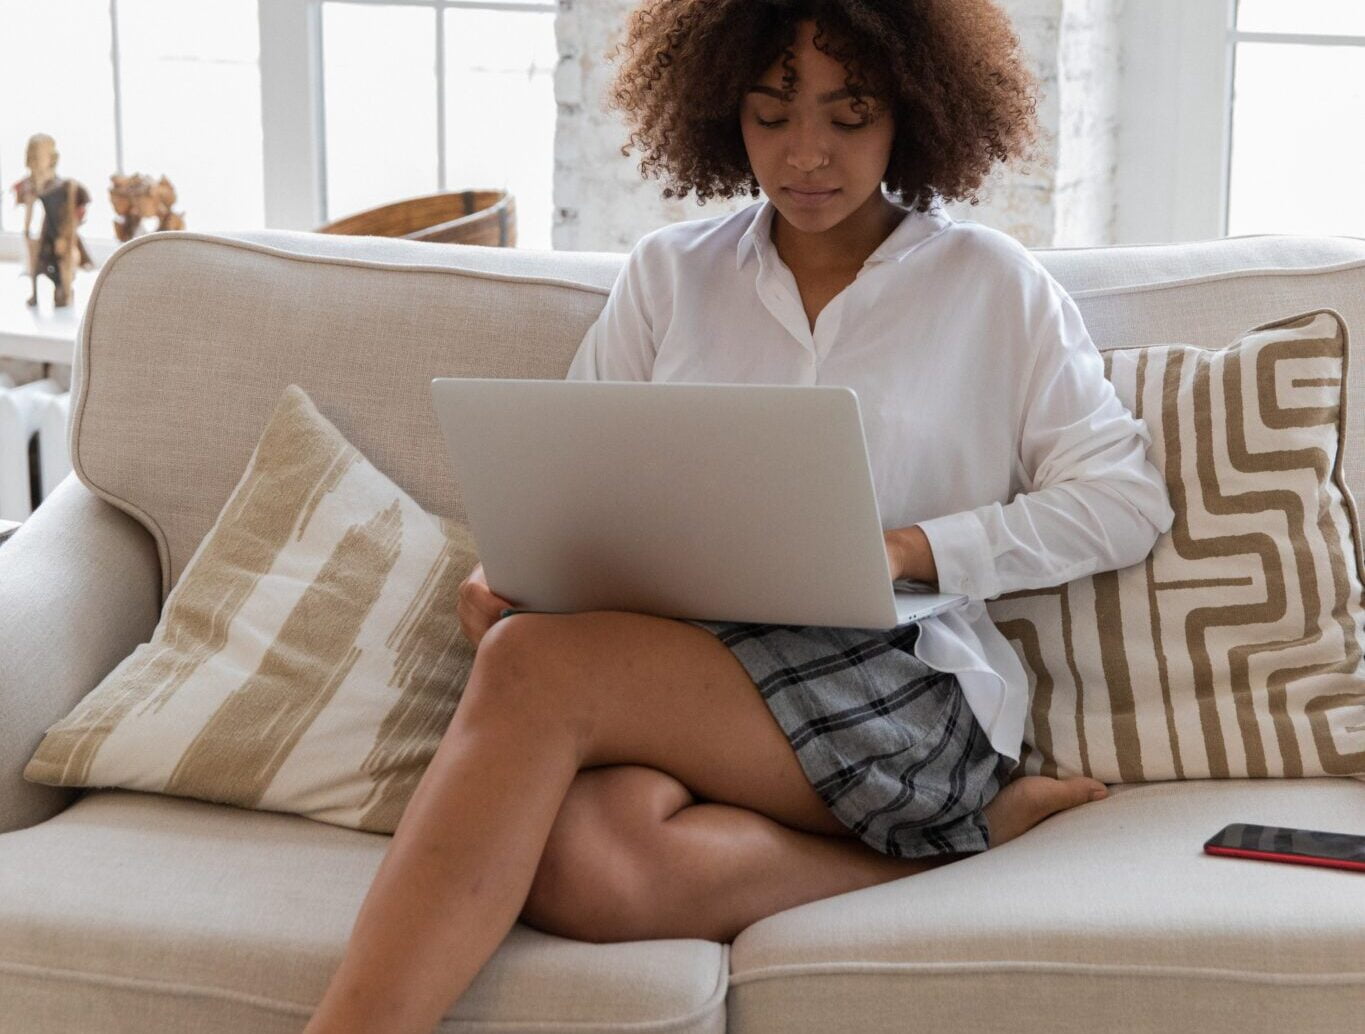 women sits on couch working on her laptop with her phone next to her